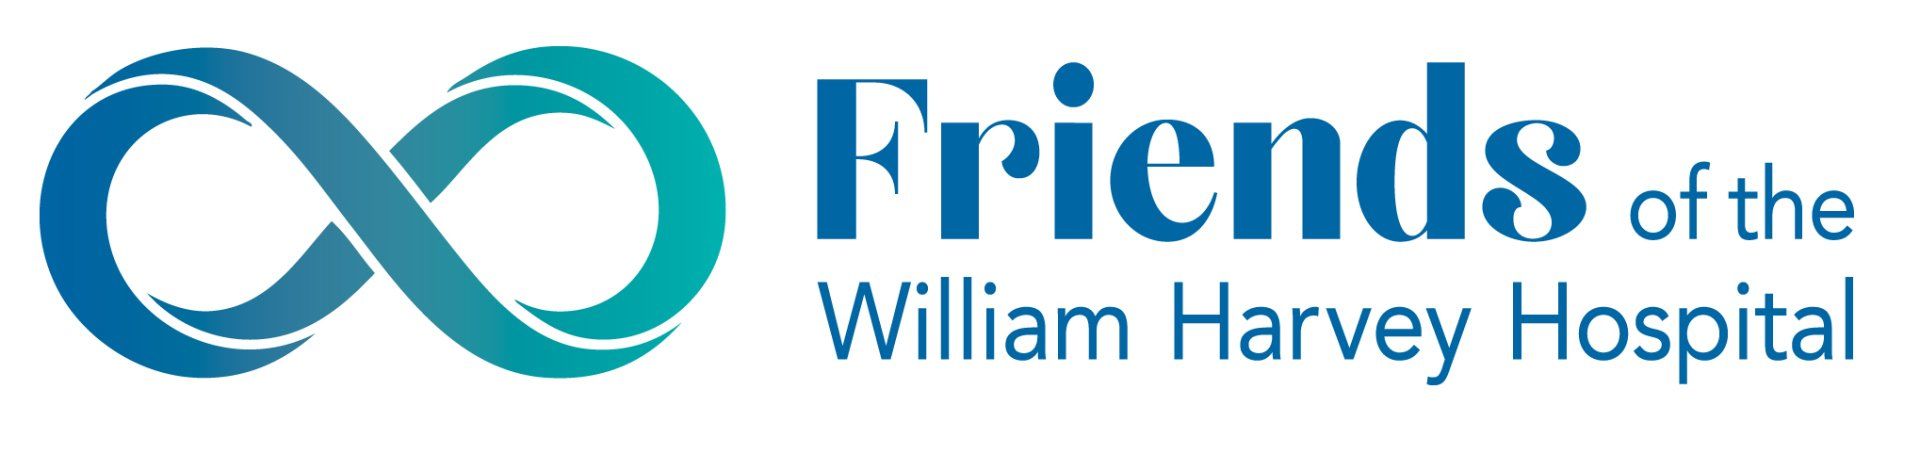 Friends of the William Harvey Hospital